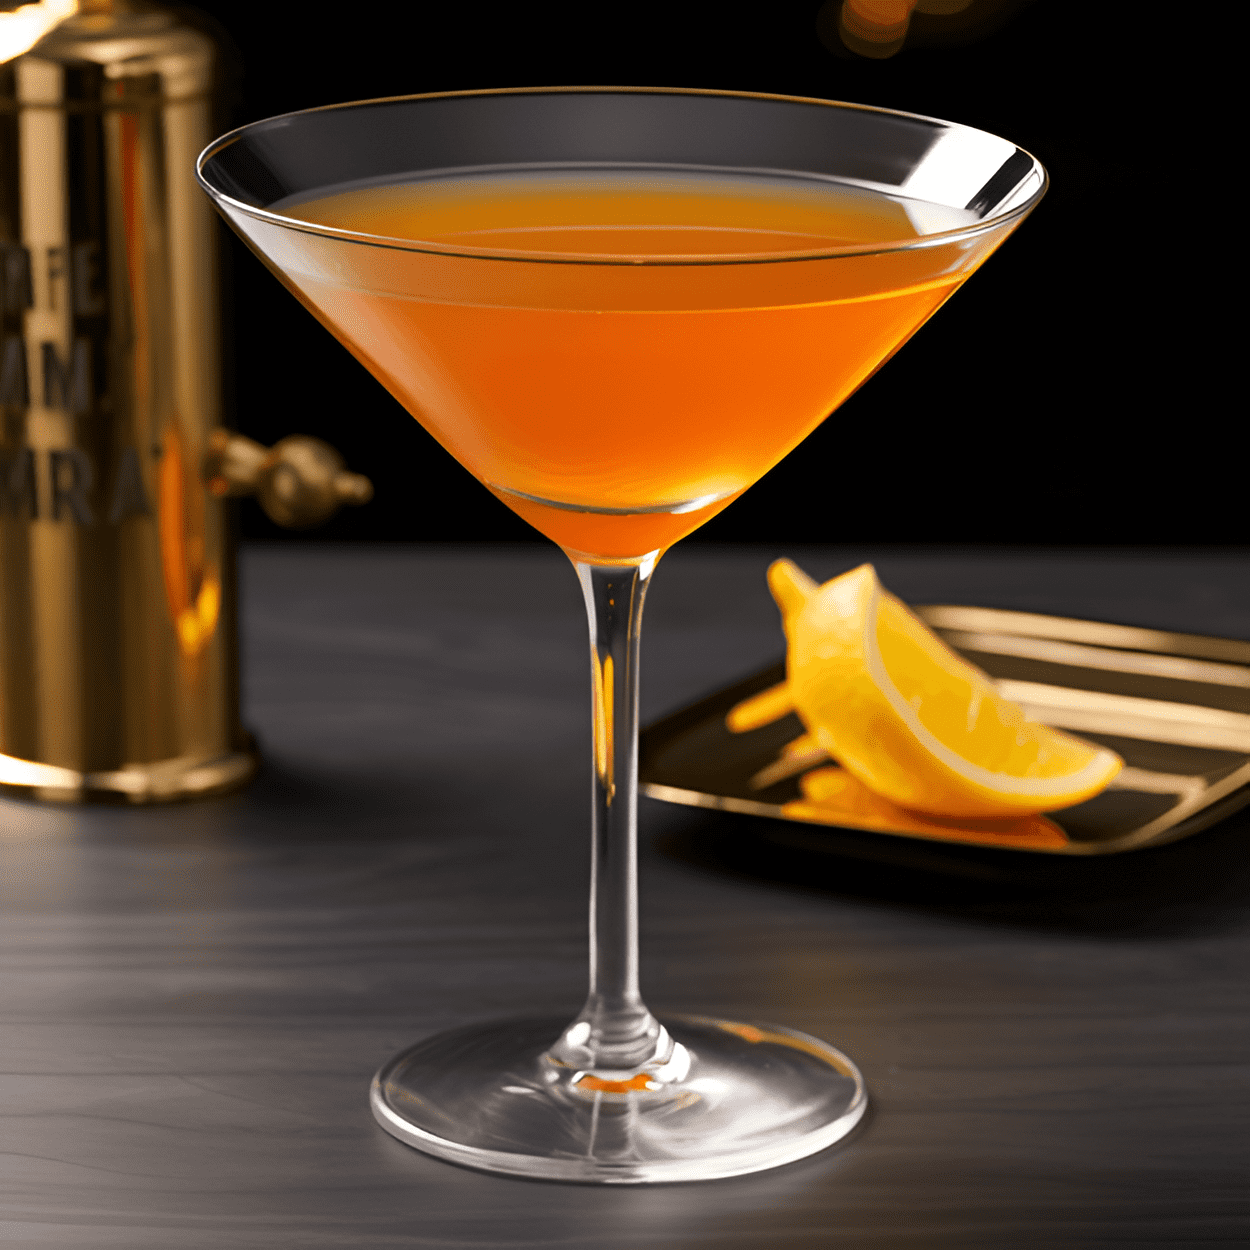 Murphy's Law Cocktail Recipe - The Murphy's Law cocktail is a delightful mix of sweet, sour, and bitter flavors. The initial taste is a refreshing citrus tang, followed by a subtle sweetness from the liqueurs. The finish is a pleasant, lingering bitterness that leaves you wanting more.